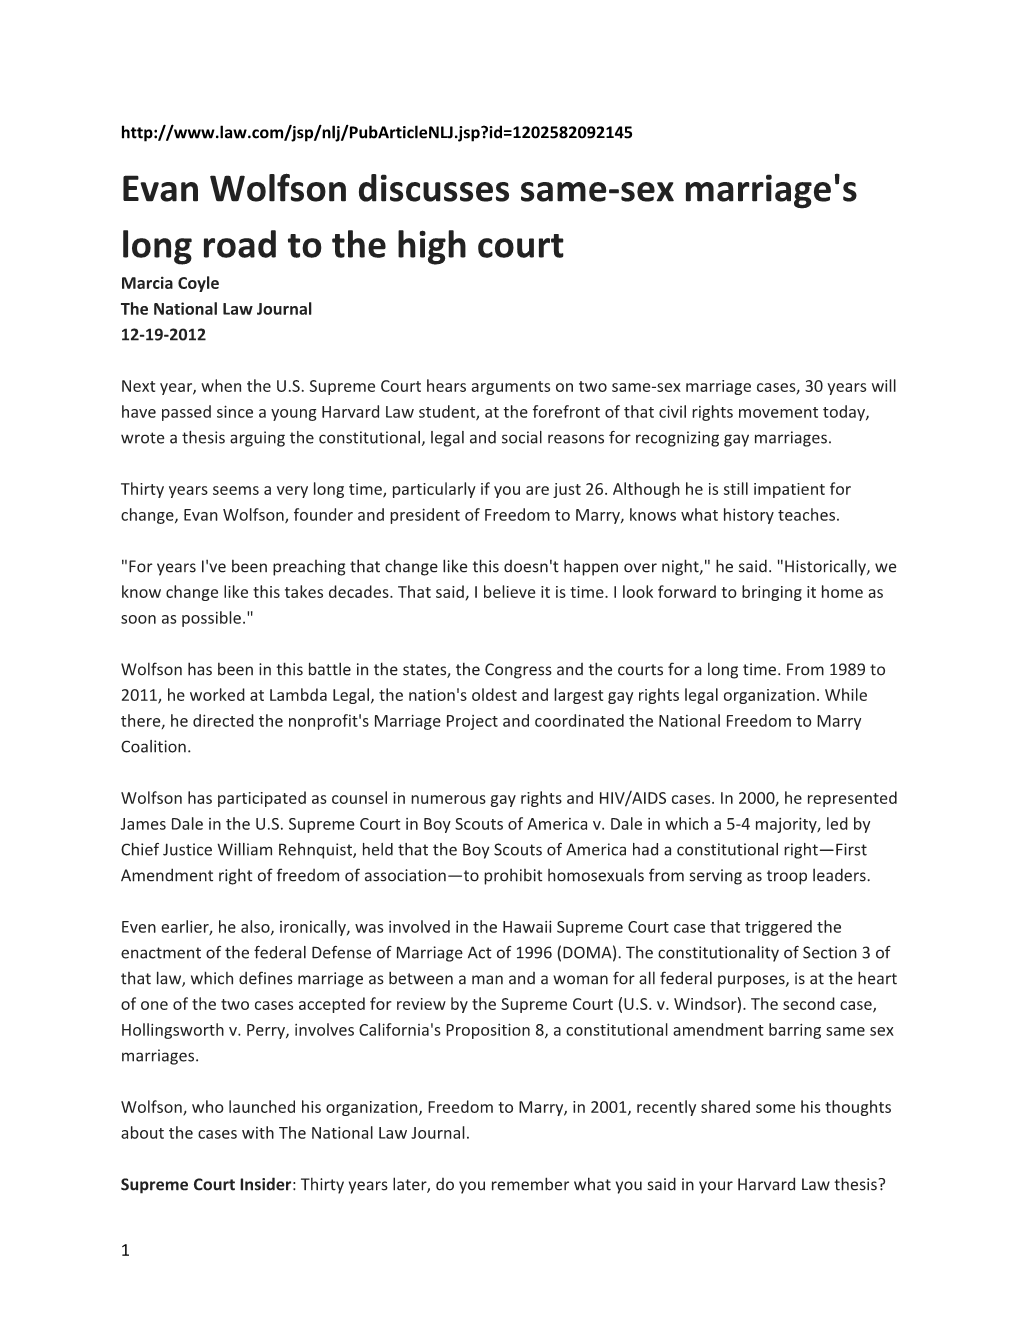 Evan Wolfson Discusses Same-Sex Marriage's Long Road to the High Court Marcia Coyle The